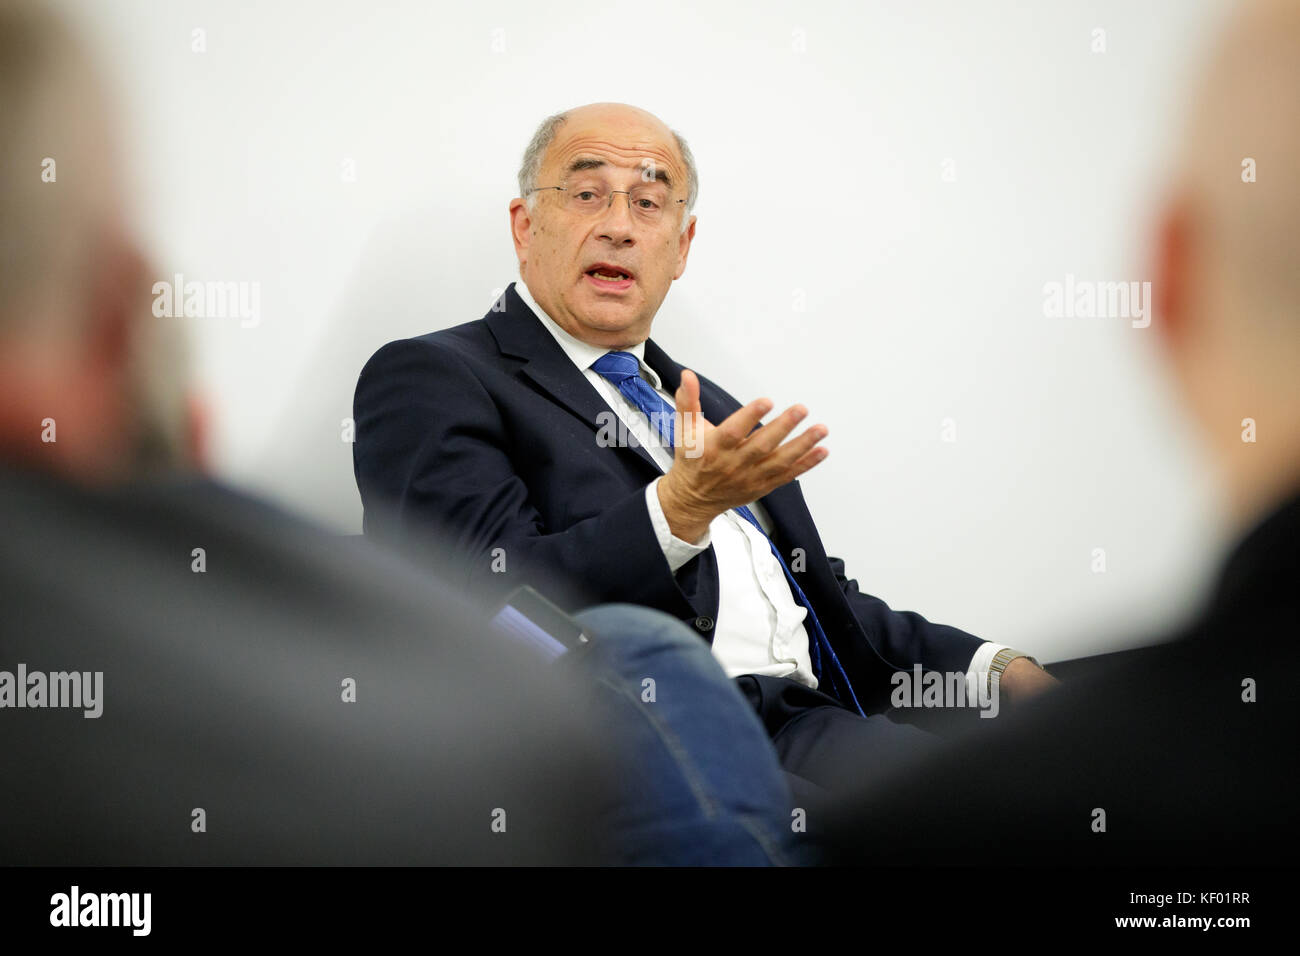 Sir Brian Leveson PC - An English judge who chaired the public inquiry into the culture, practices and ethics of the British press Stock Photo